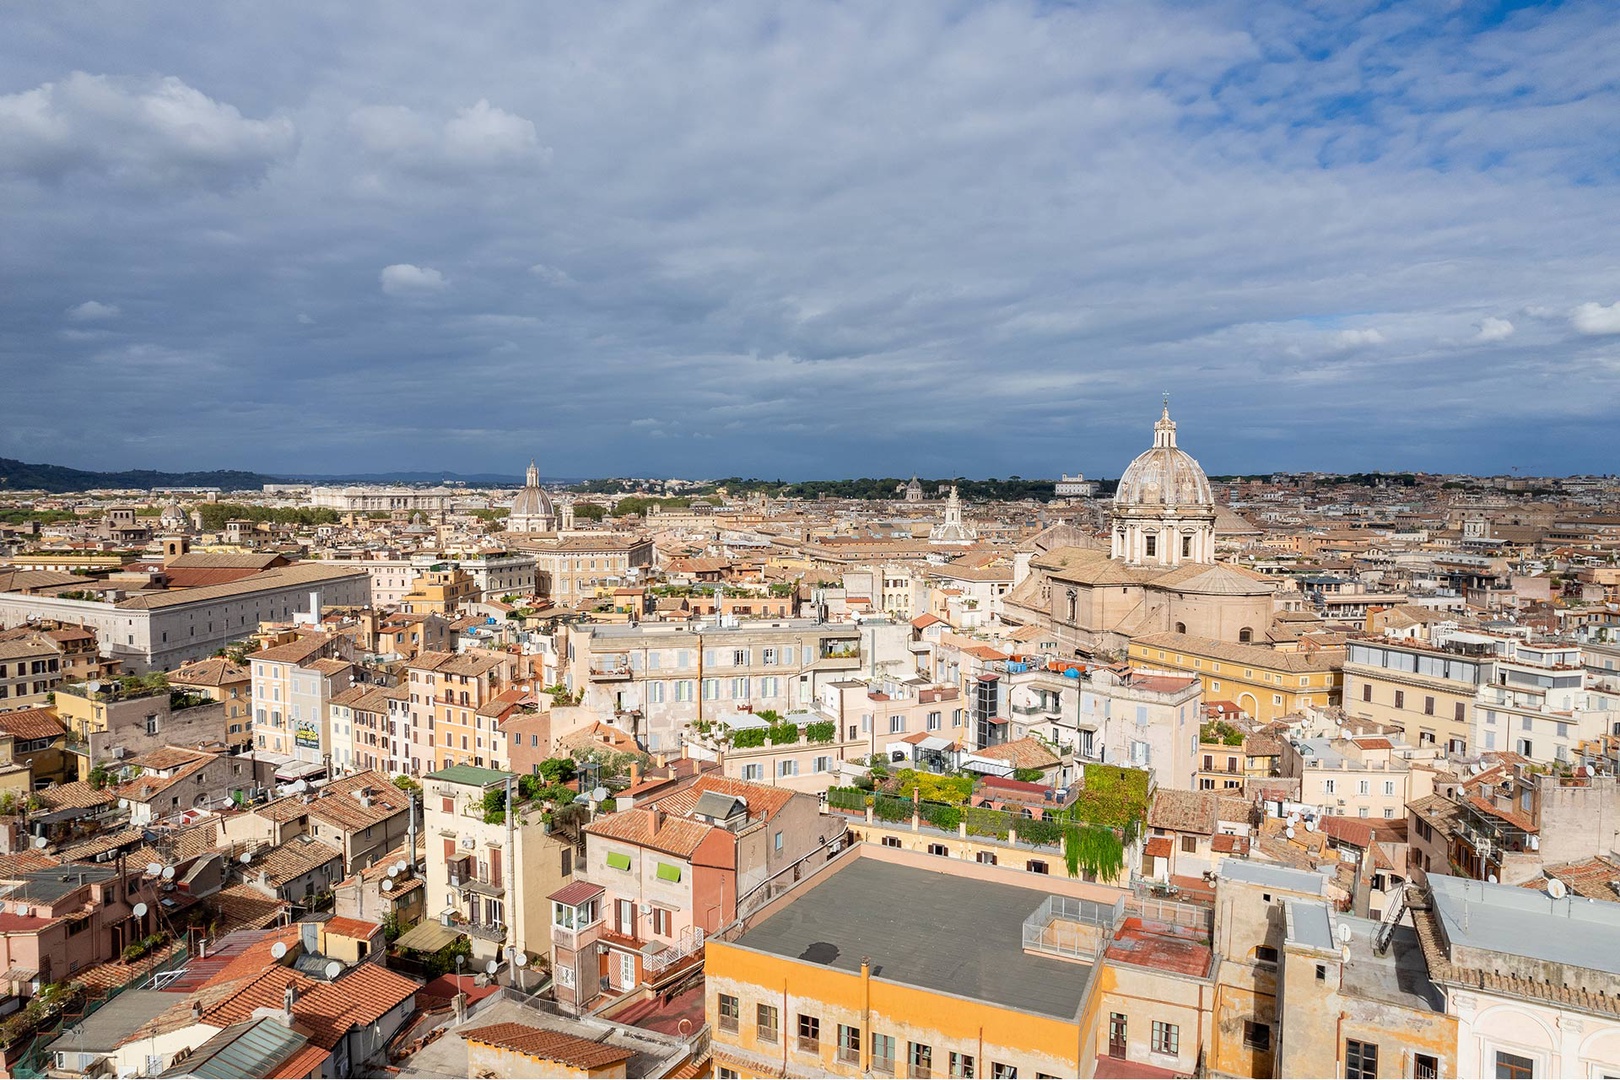 Lucia is the perfect home base to explore the sites and wonders of Rome!